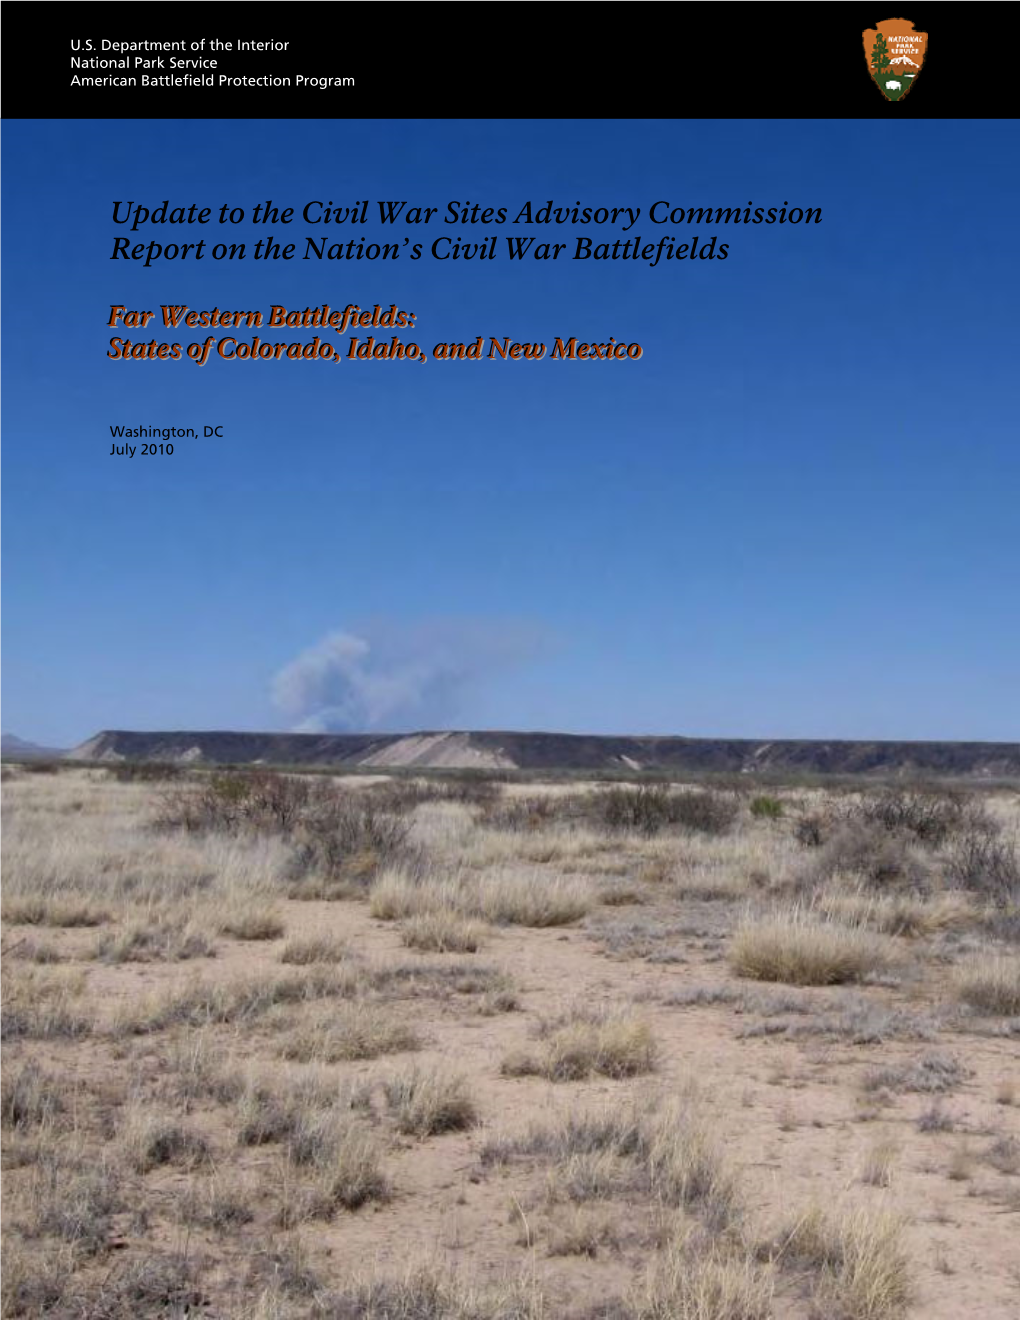 Update to the Civil War Sites Advisory Commission Report for Colorado, Idaho, and New Mexico